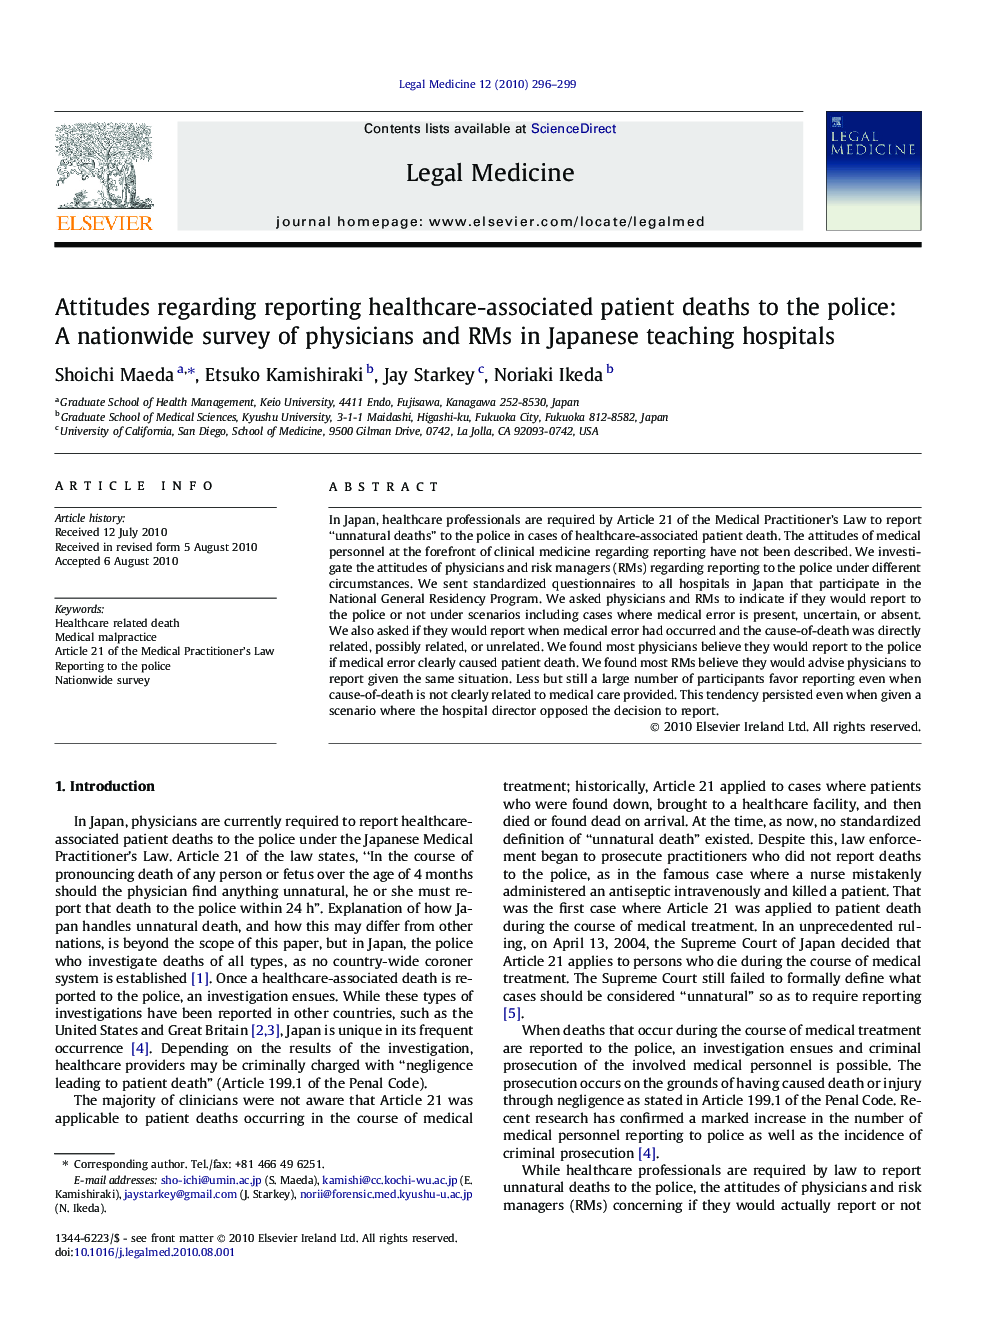 Attitudes regarding reporting healthcare-associated patient deaths to the police: A nationwide survey of physicians and RMs in Japanese teaching hospitals